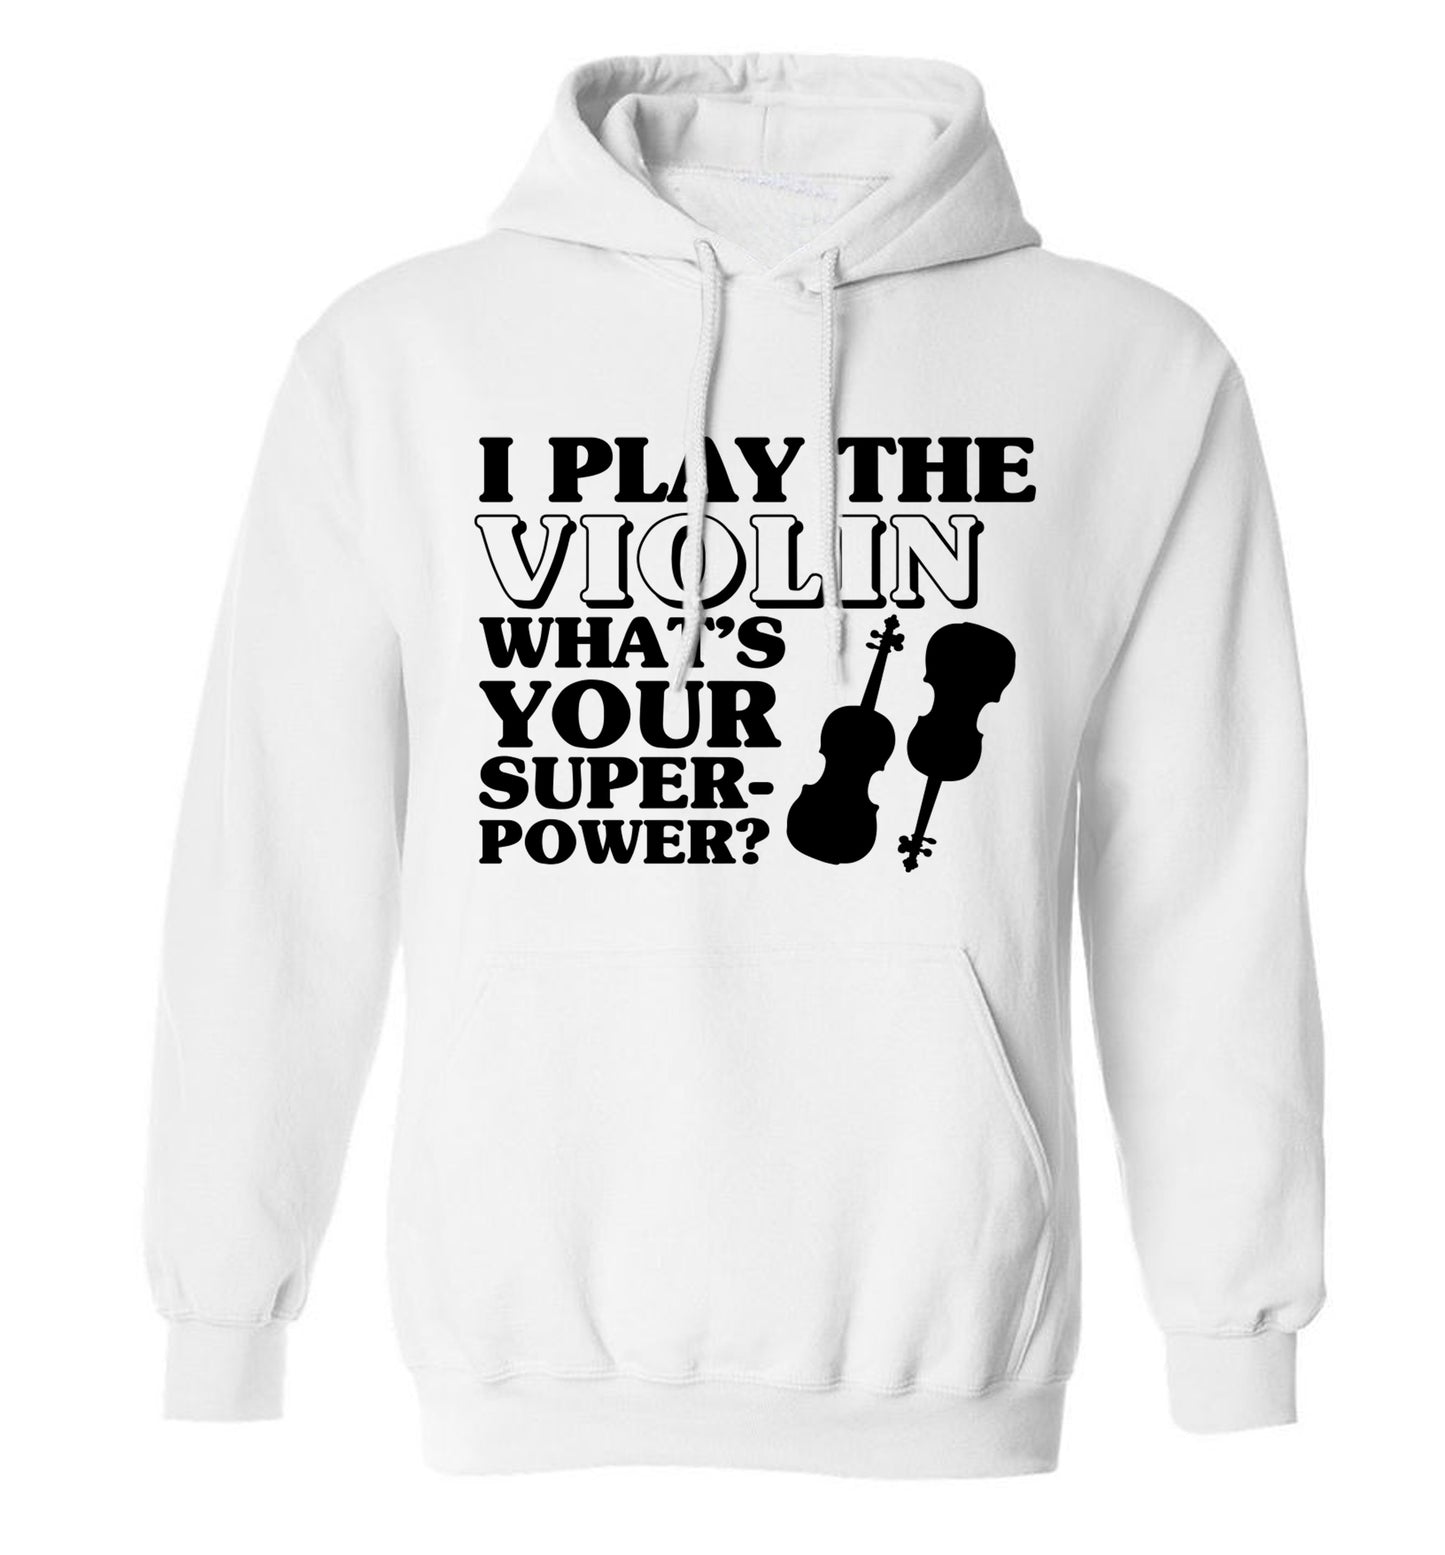 I Play Violin What's Your Superpower? adults unisex white hoodie 2XL